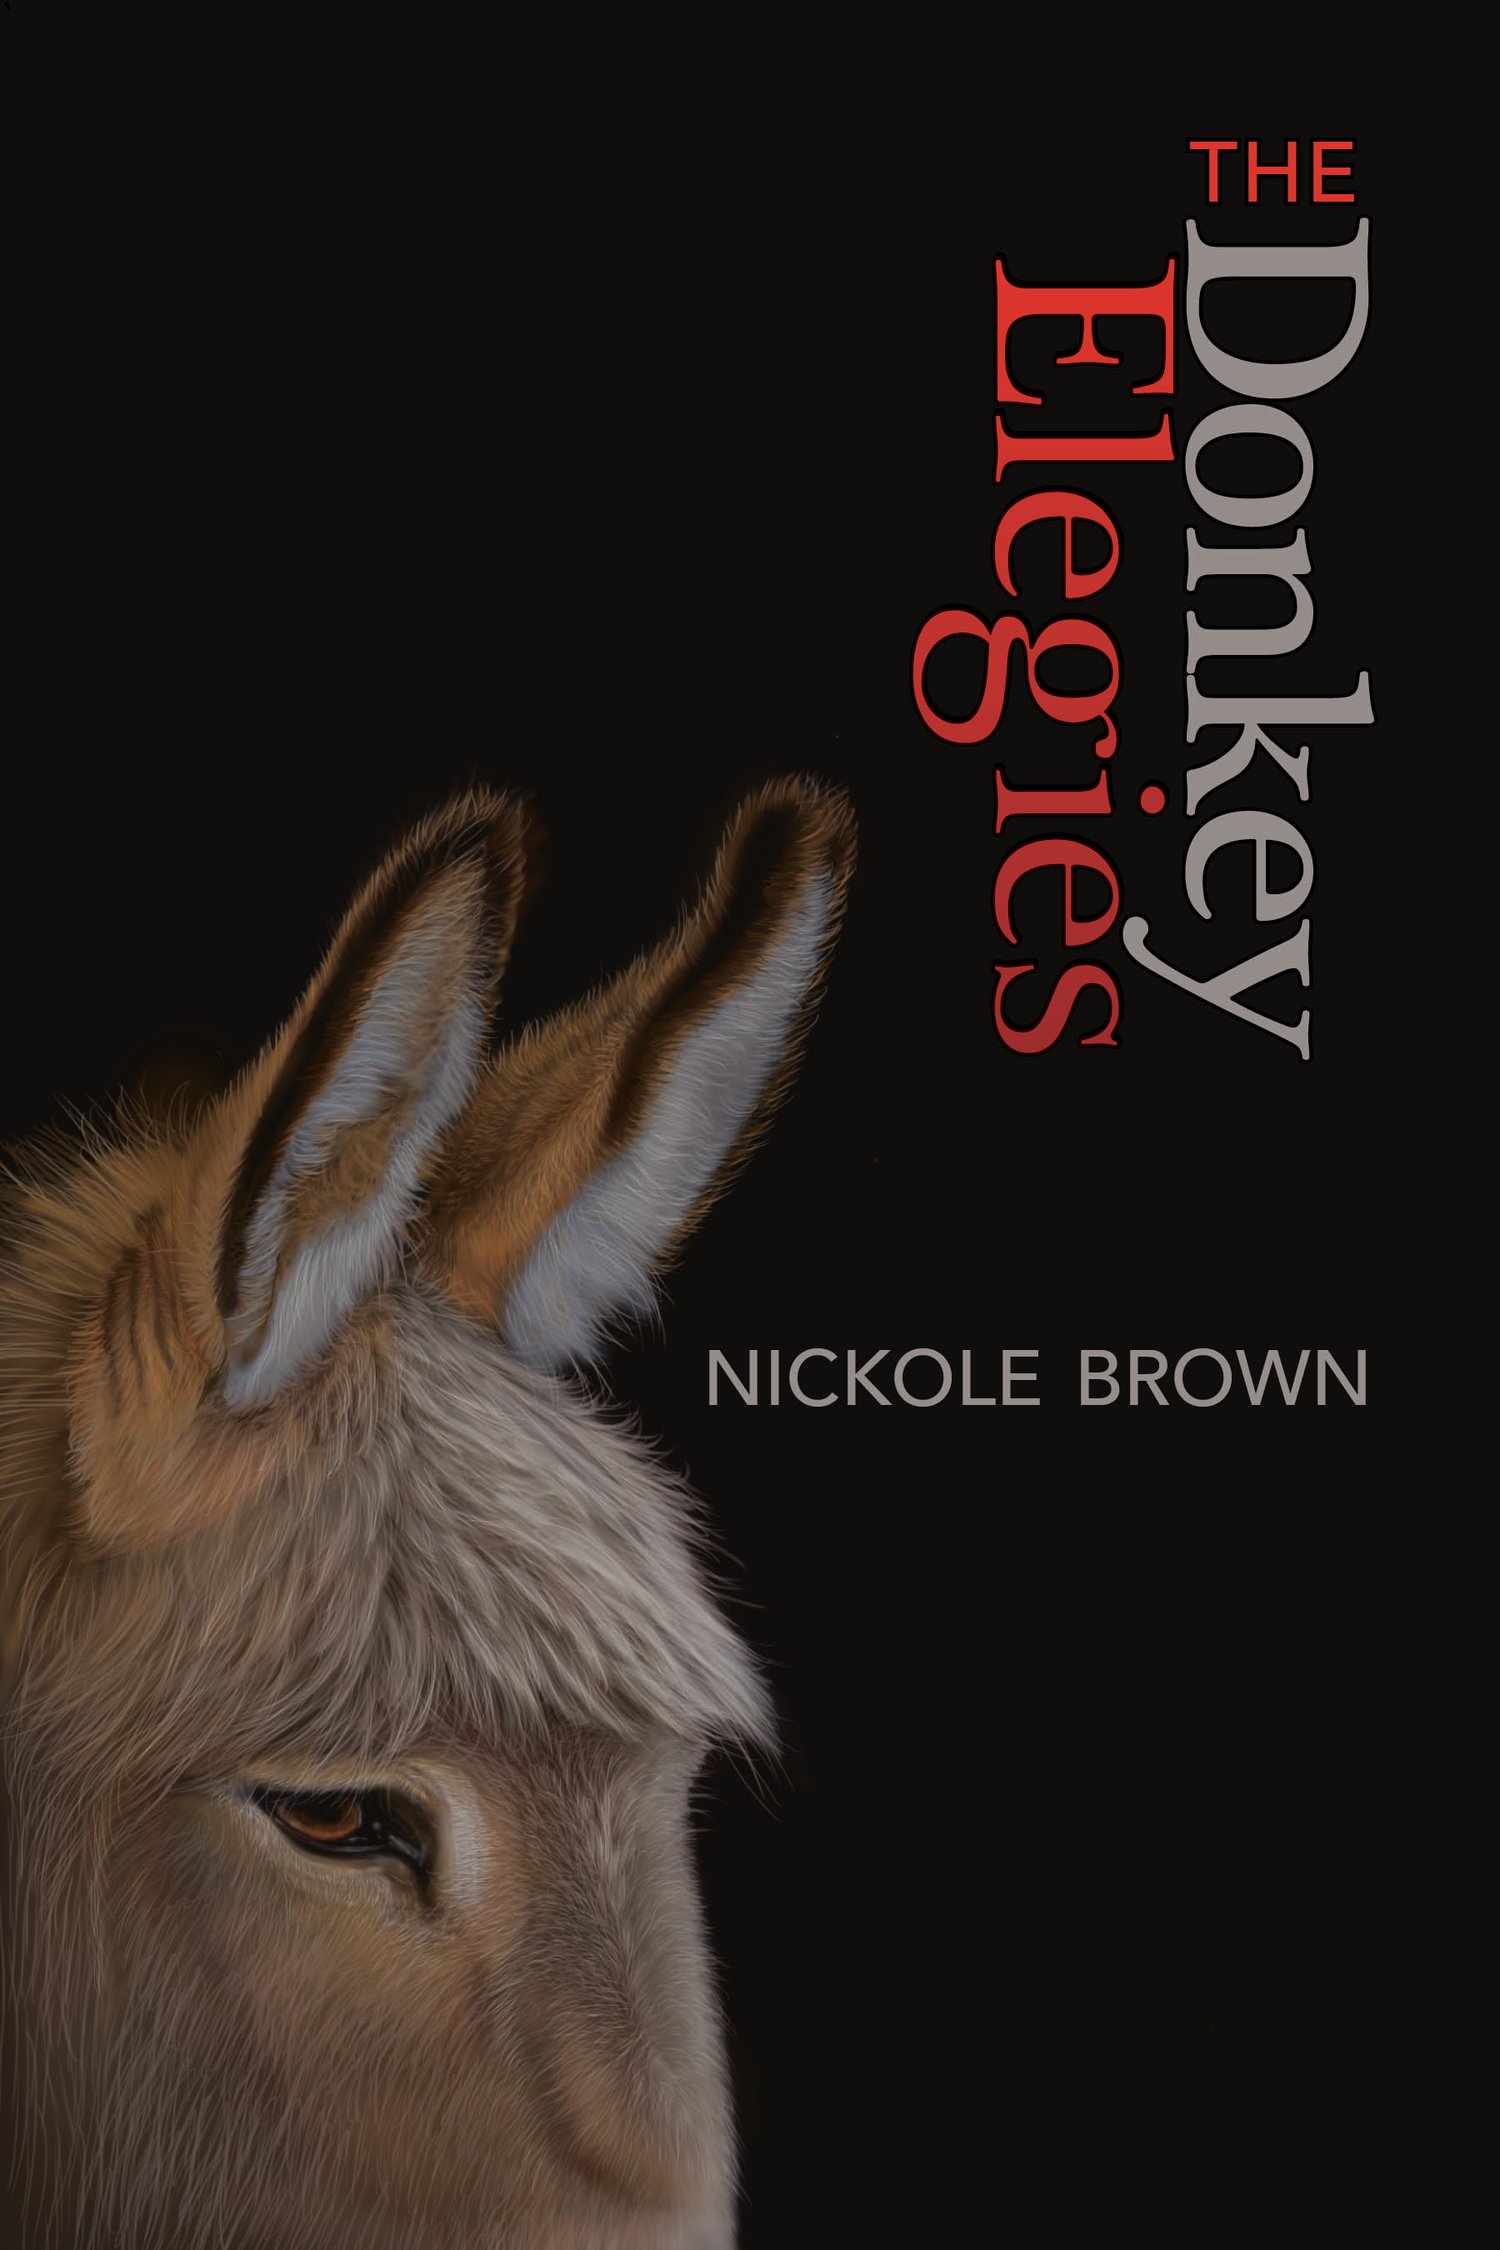 Image of The Donkey Elegies by Nickole Brown